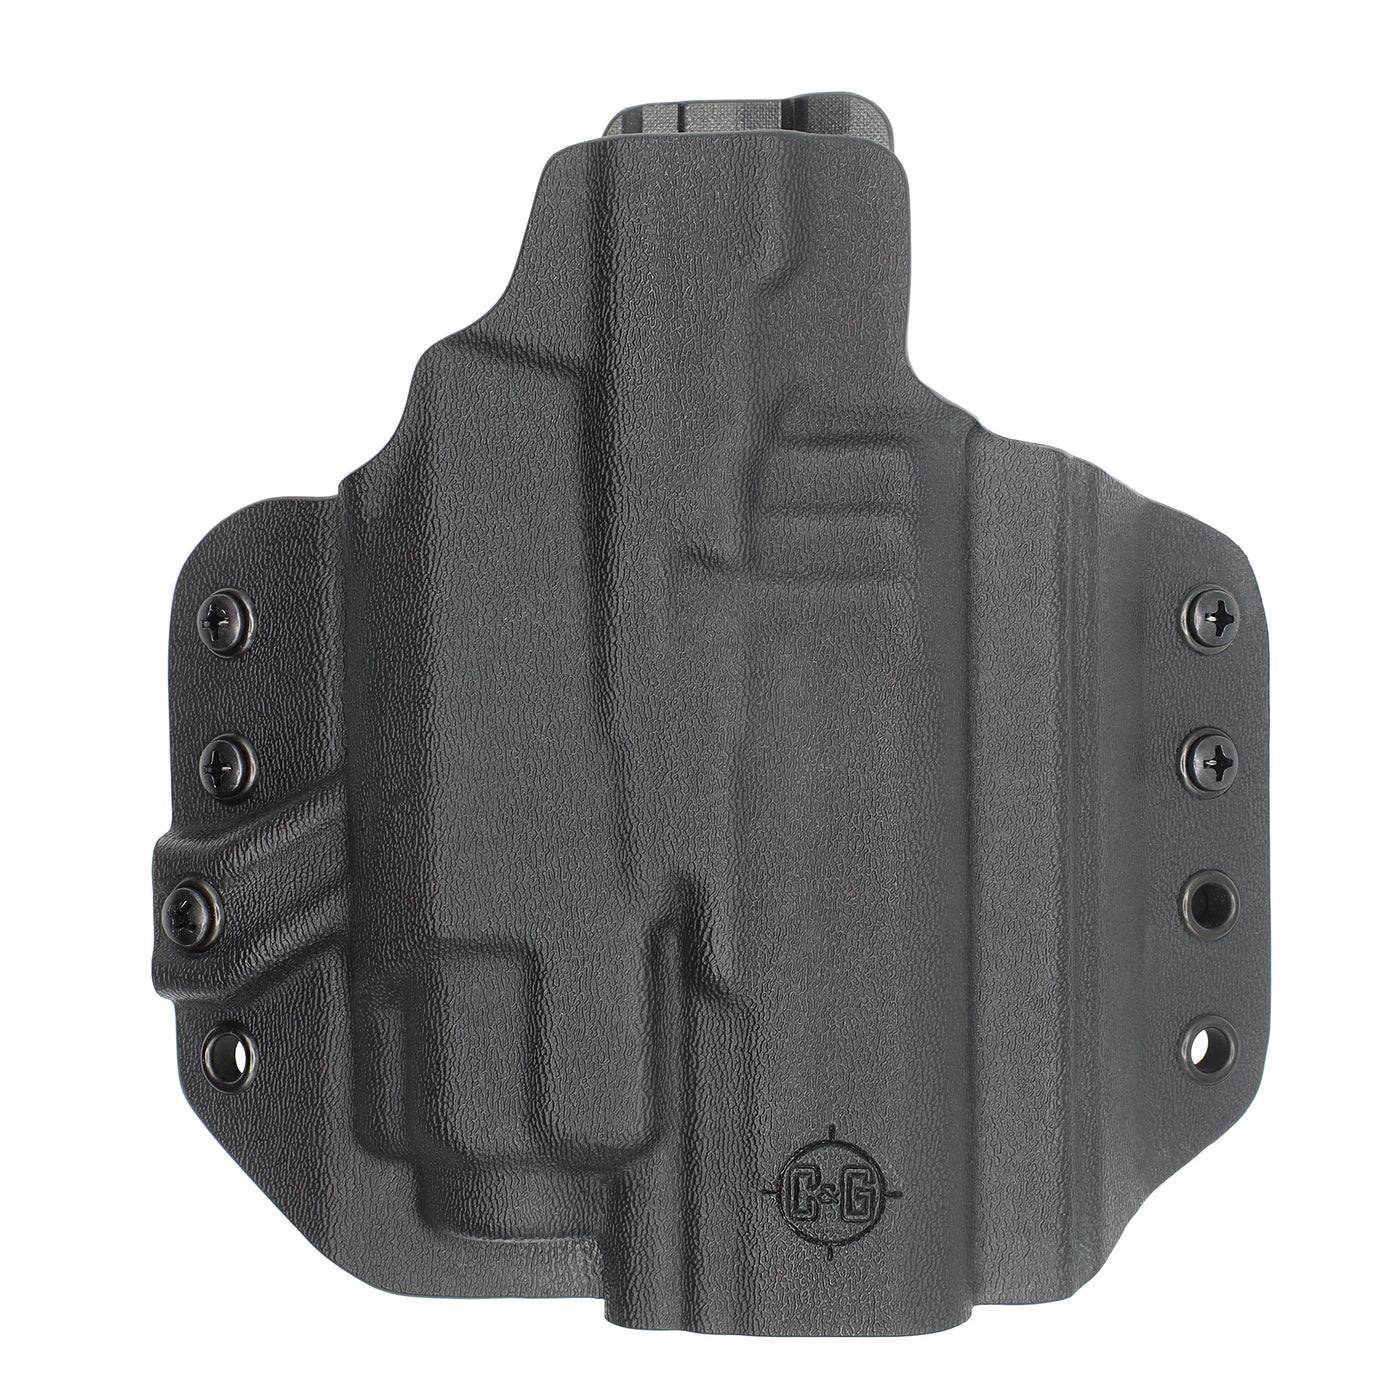 C&G Holsters quickship OWB tactical M&P 9/40 streamlight TLR8